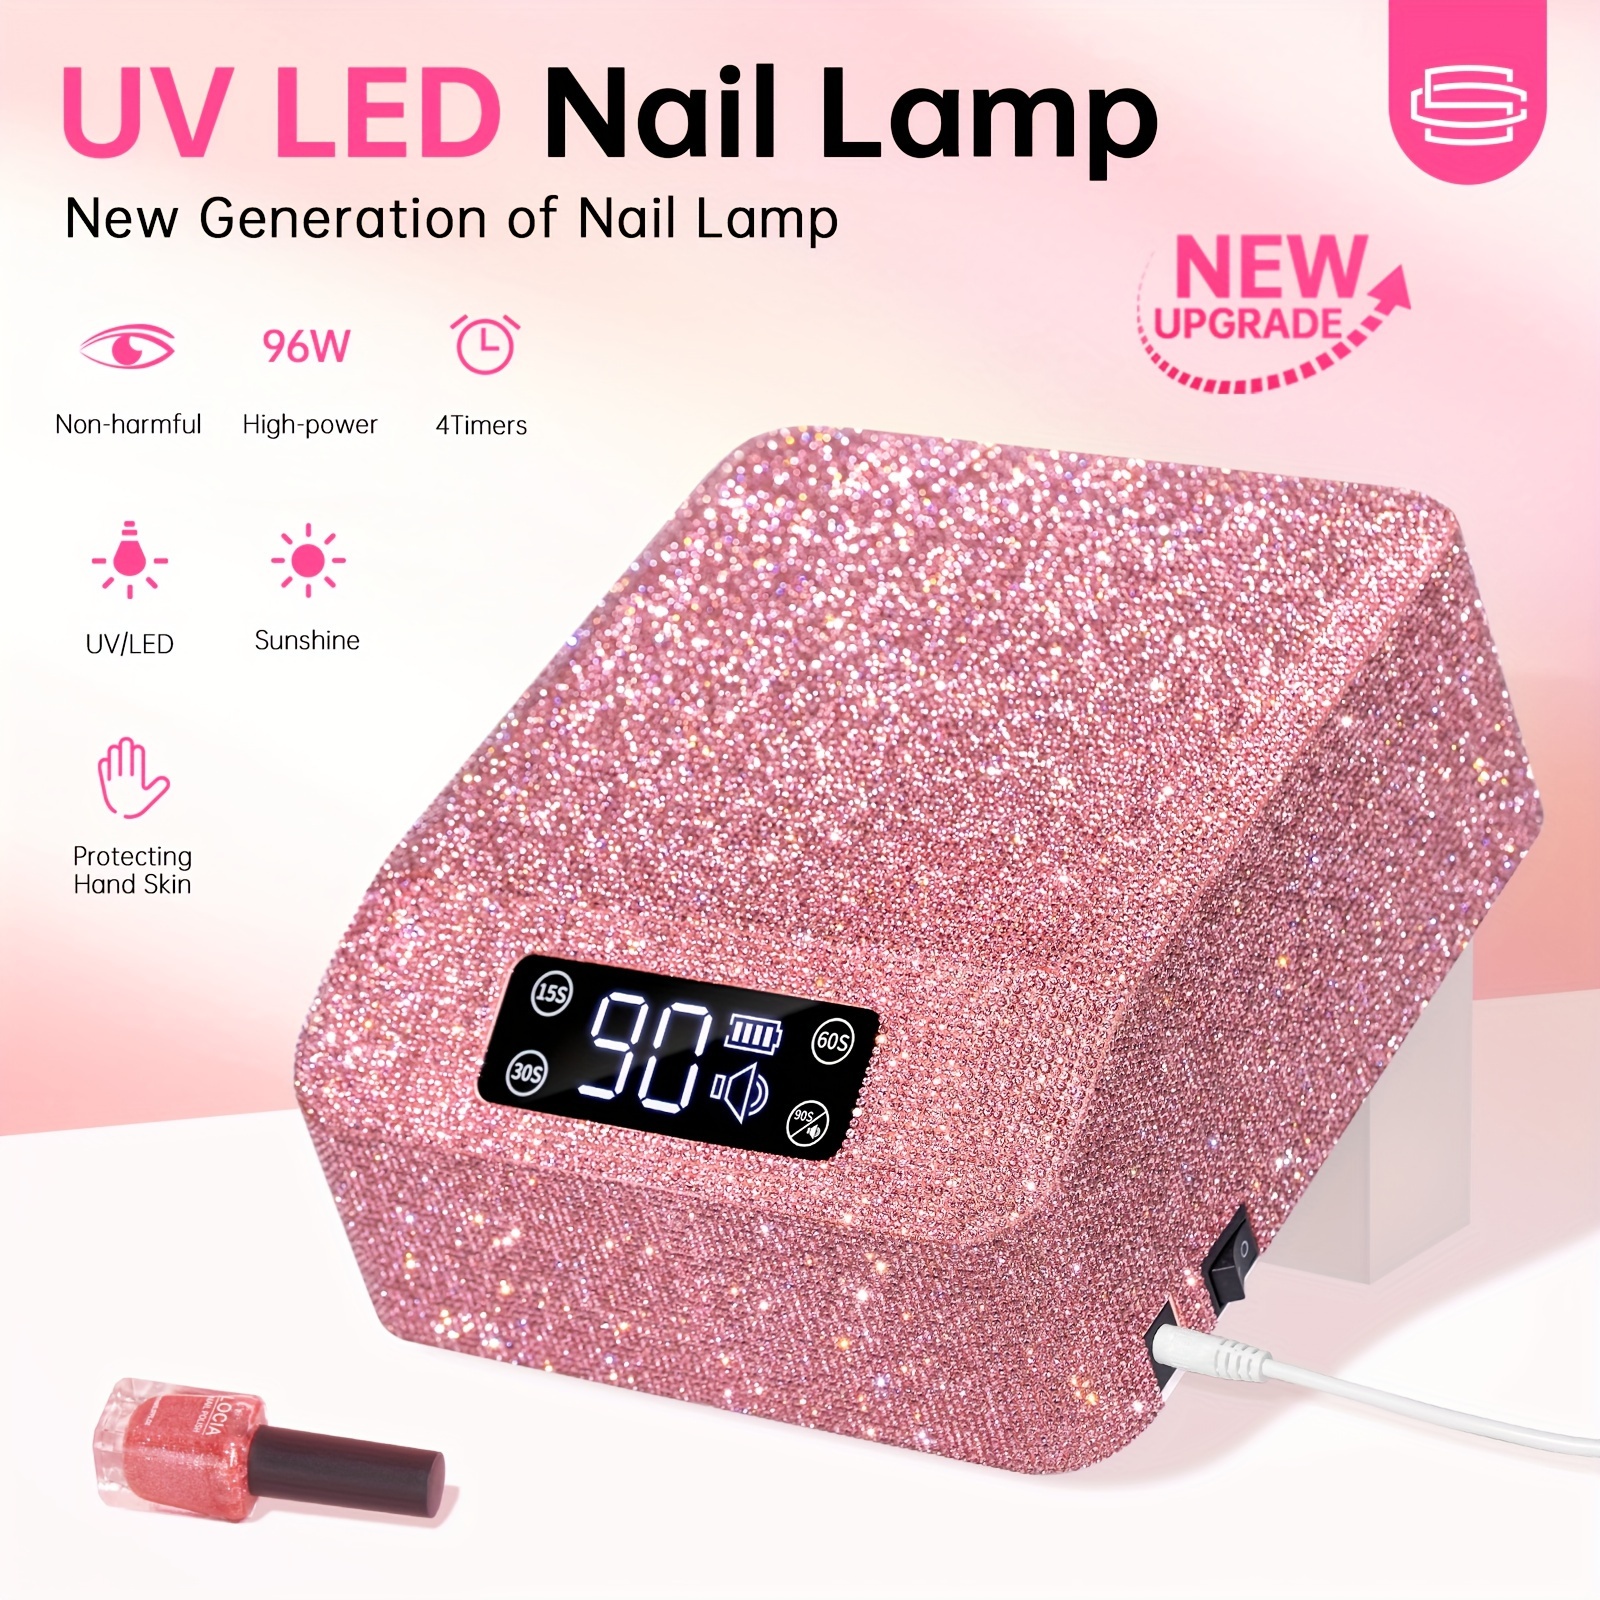 

Uv Led Nail Lamp Wired Nail Dryer Sparkly Gel Polish Light 4 Timer Setting Professional Quick Dry Curing Lamp With Display Auto Sensor For Salon & Home, Pink (not Wireless)